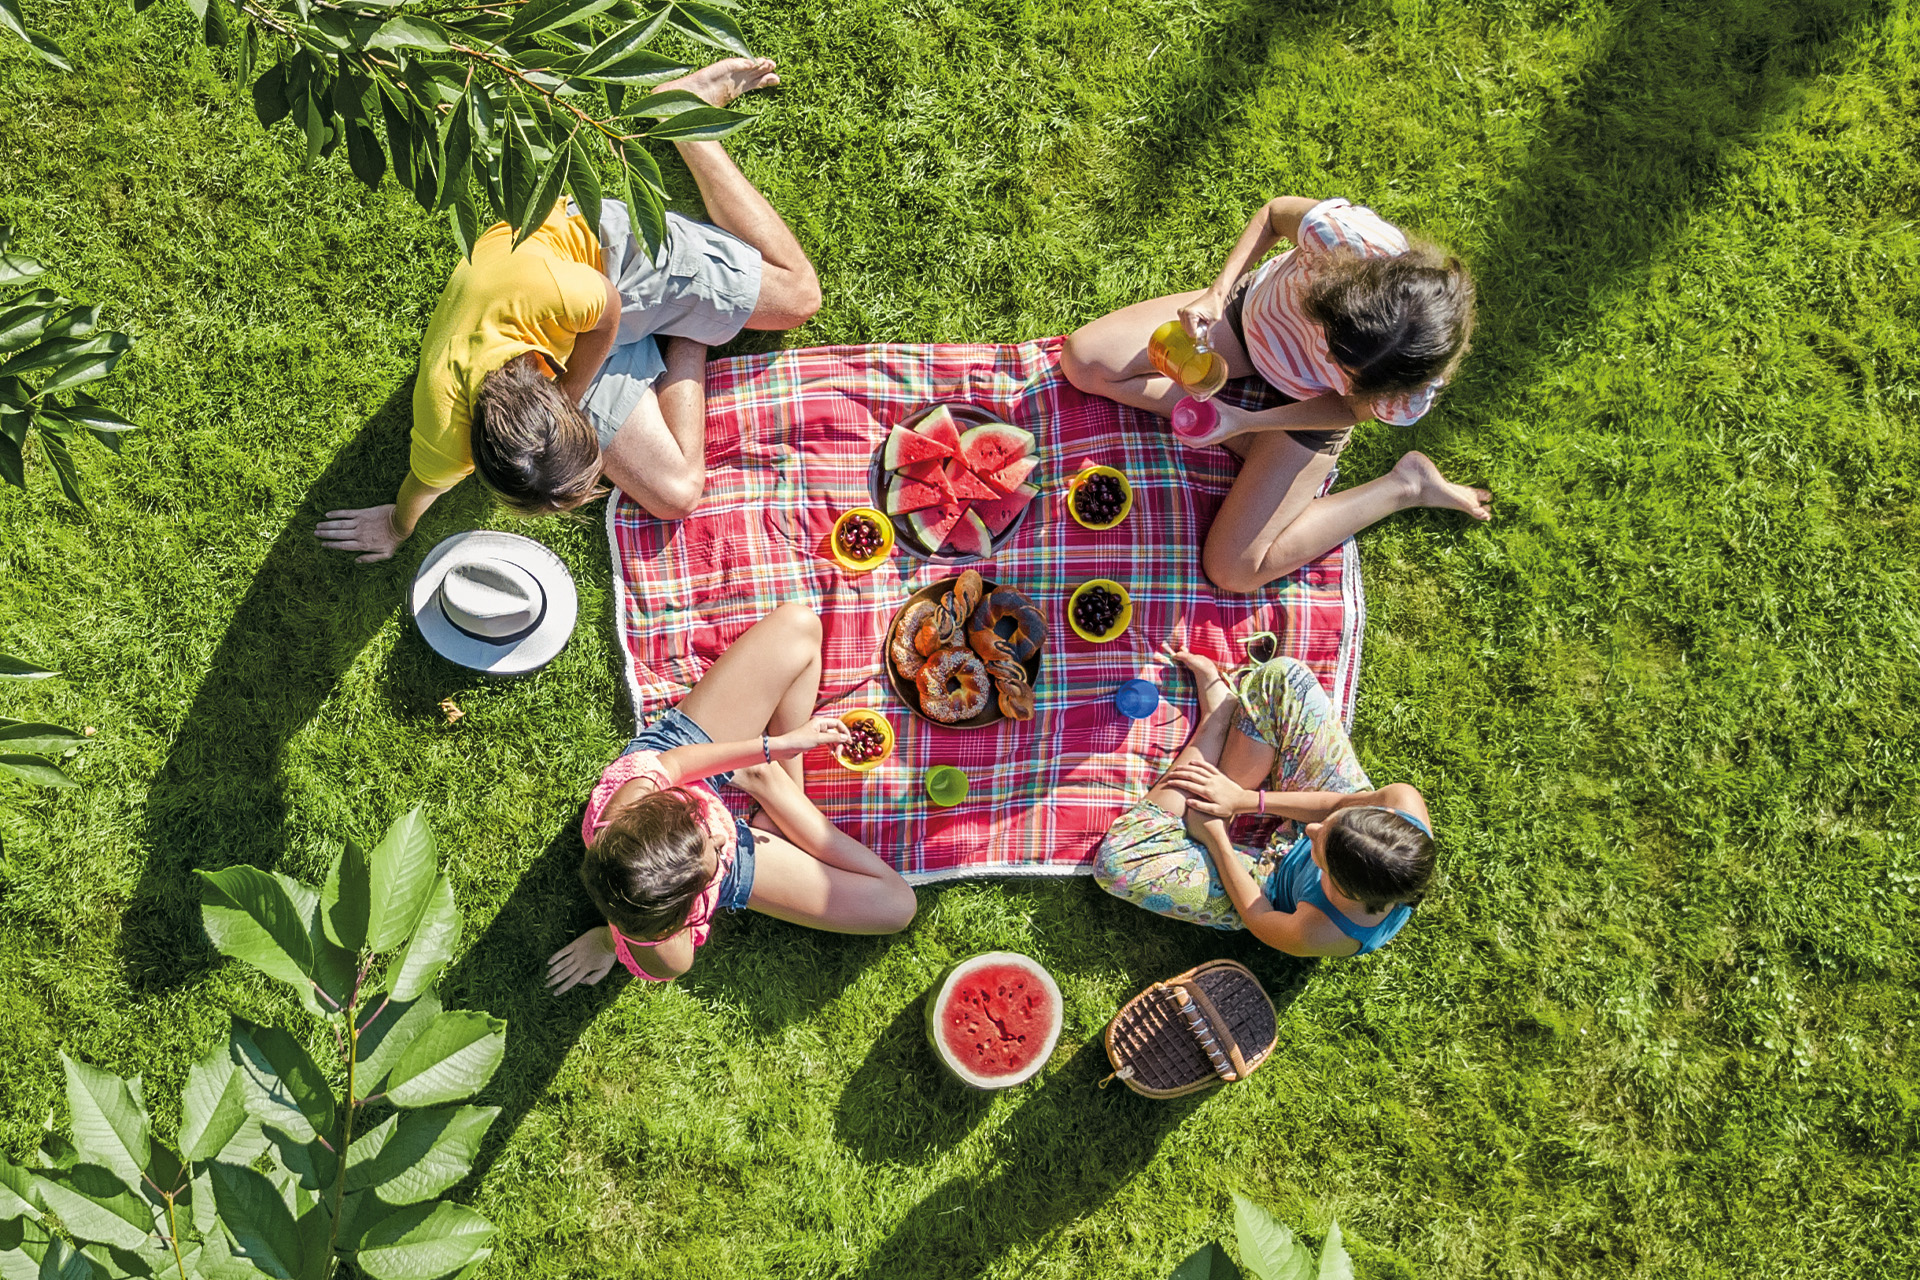 Nutritional Therapist Explains How To Pack The Perfect Picnic